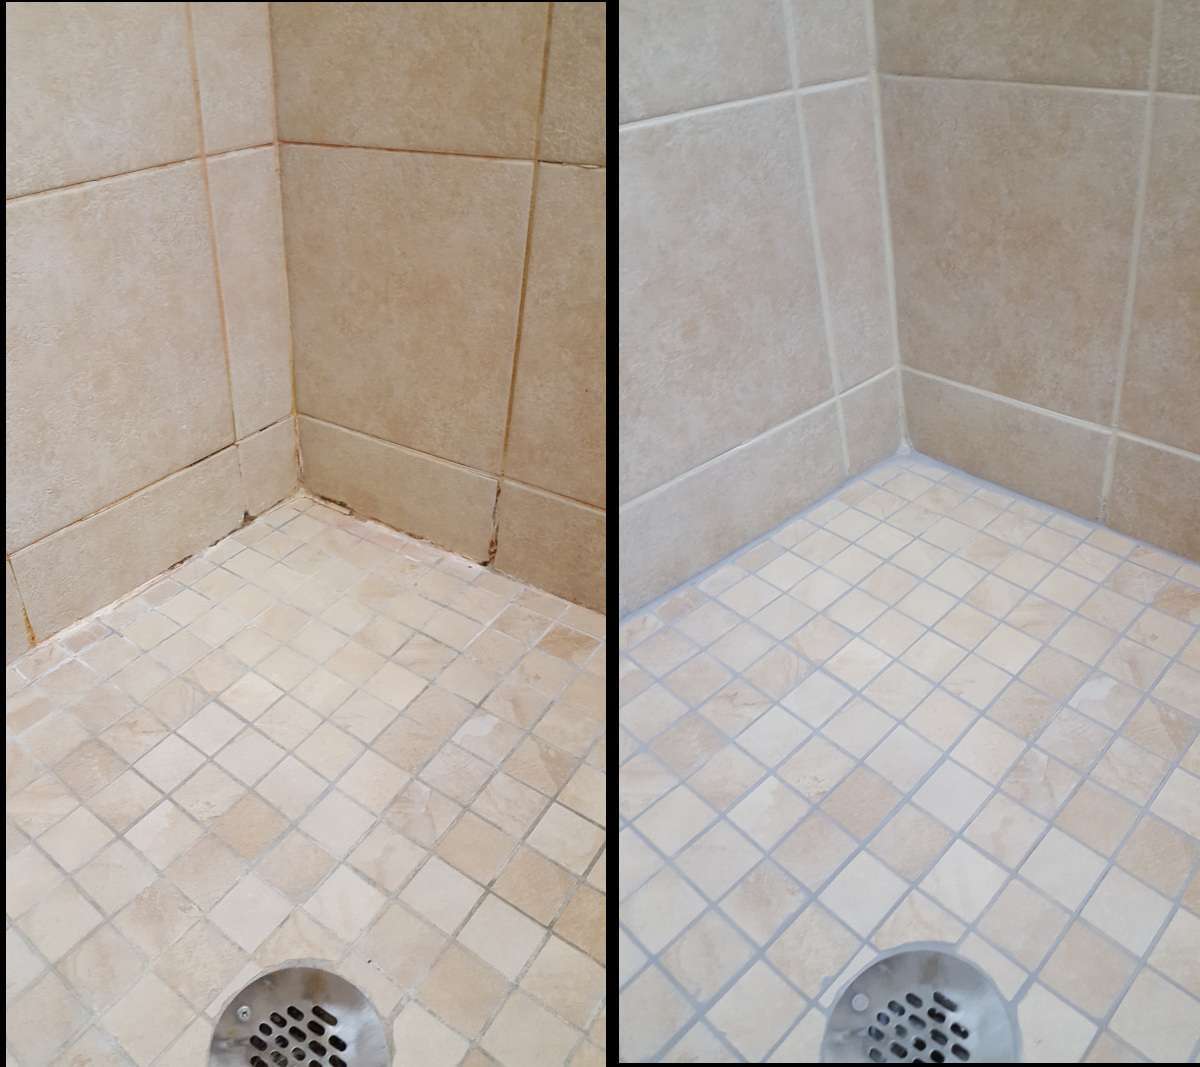 SIDE BY SIDE SHOWER REGROUTING PHOTO